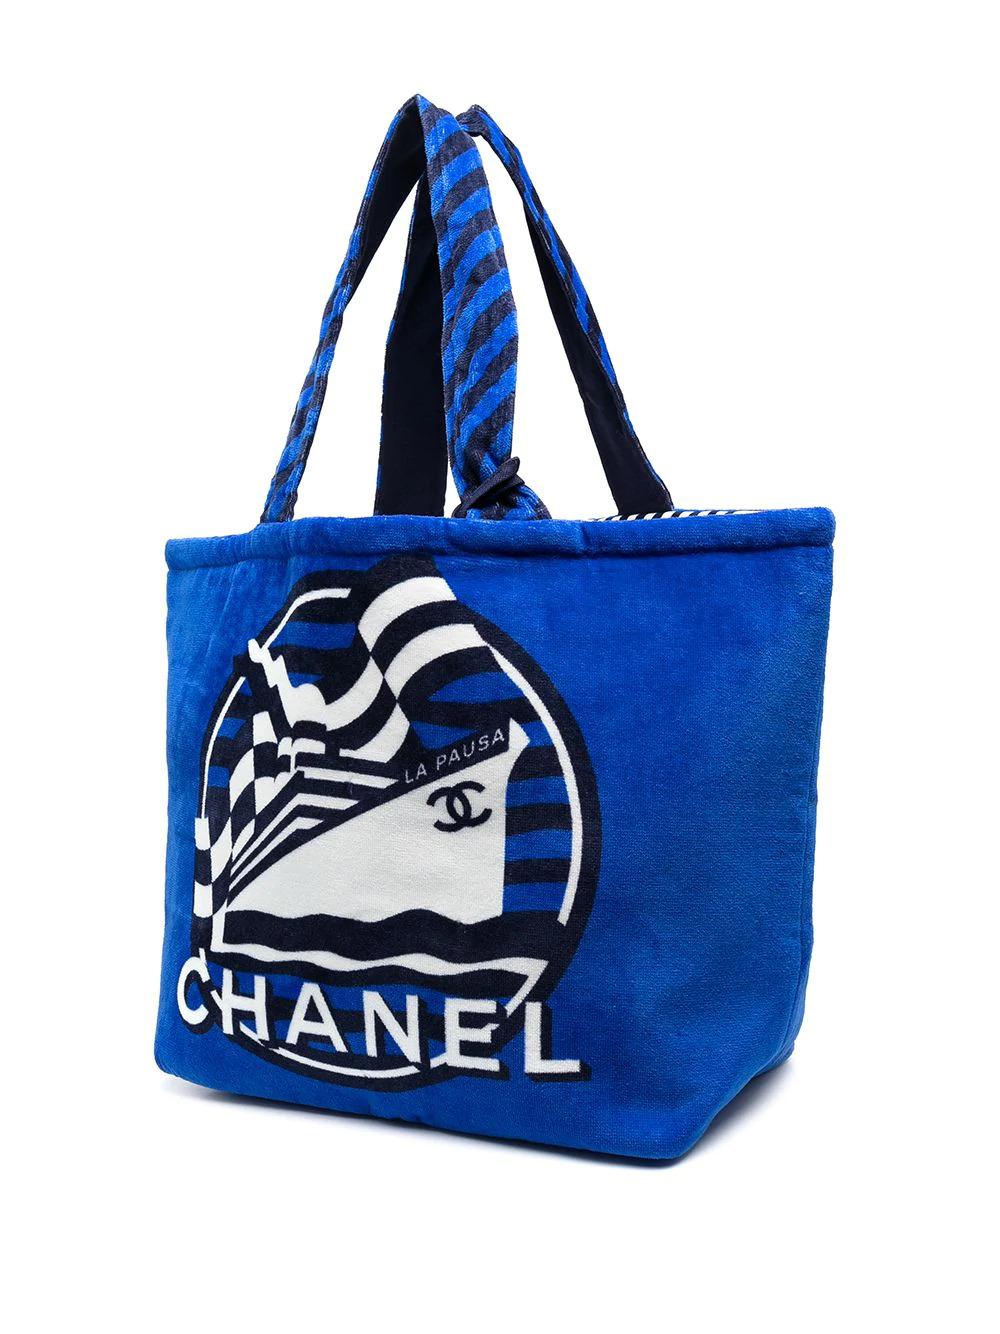 Perfect for a day at the seaside, this double-sided Chanel beach bag is the perfect size for fitting all your beach essentials. This bag comes one side in a bright blue, the other in a striped pattern, crafted from 100% cotton. 		

Colour: